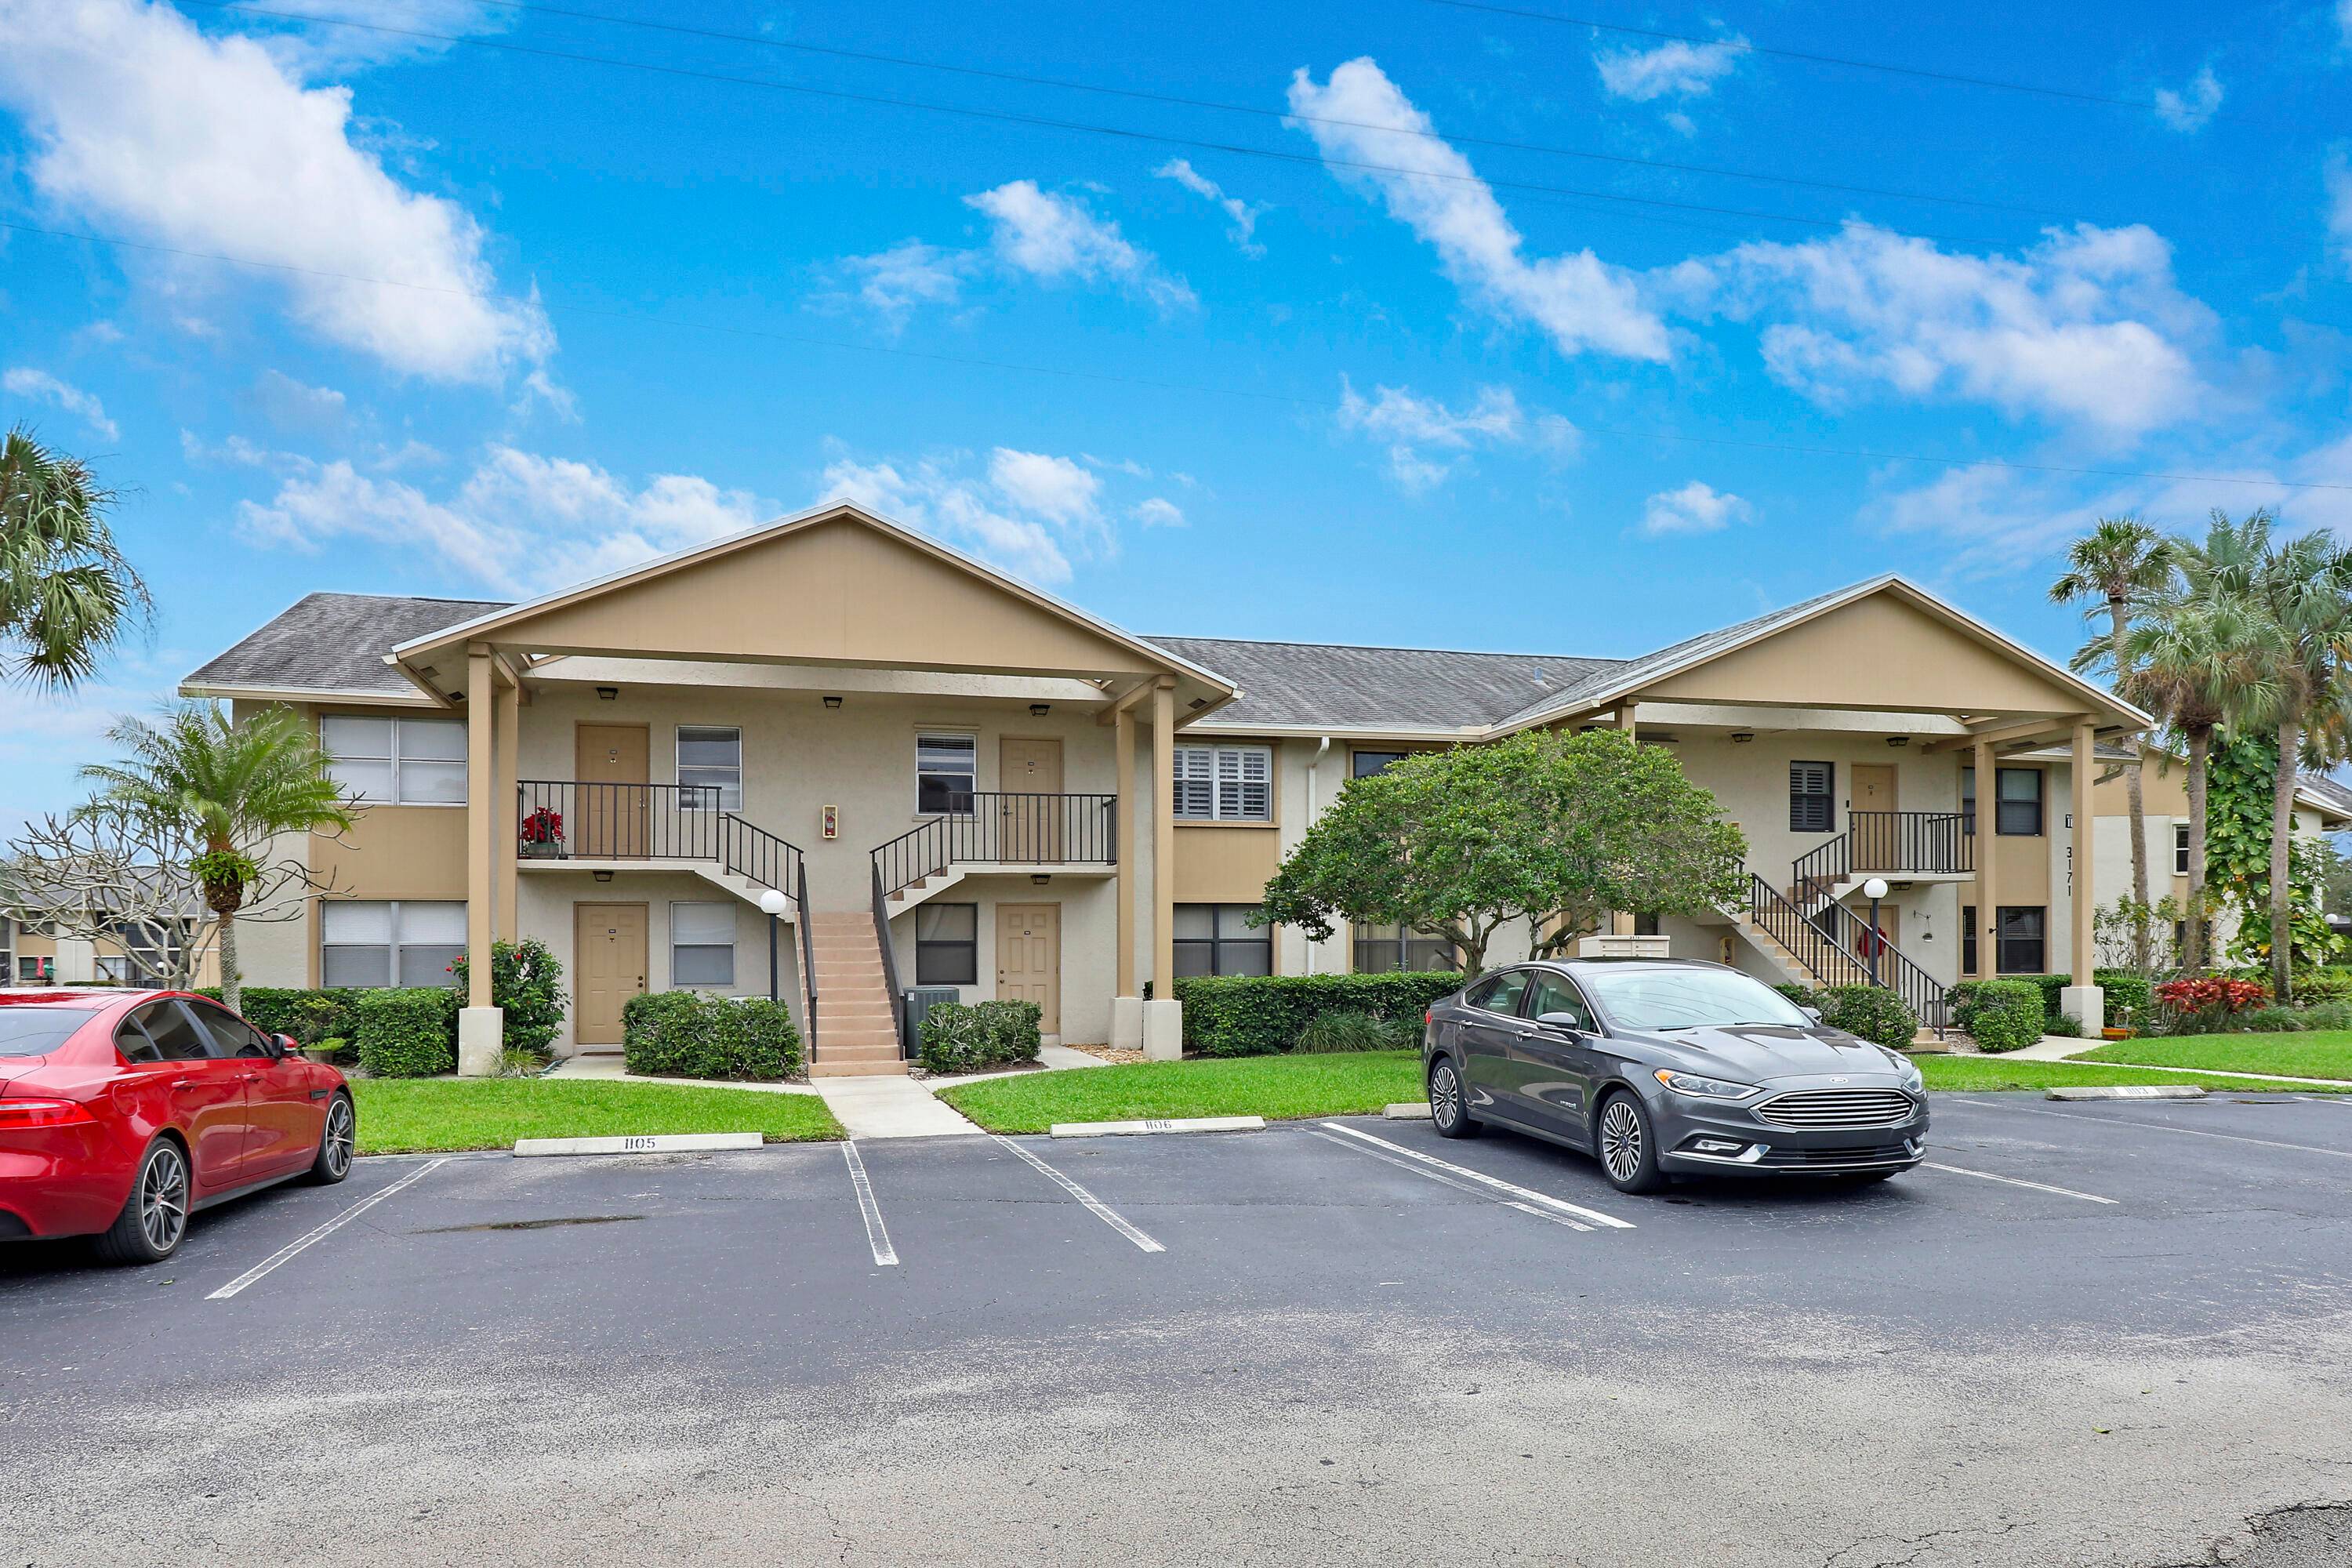 Bright and beautiful lakeview condo centrally located to it all and minutes from downtown Stuart.